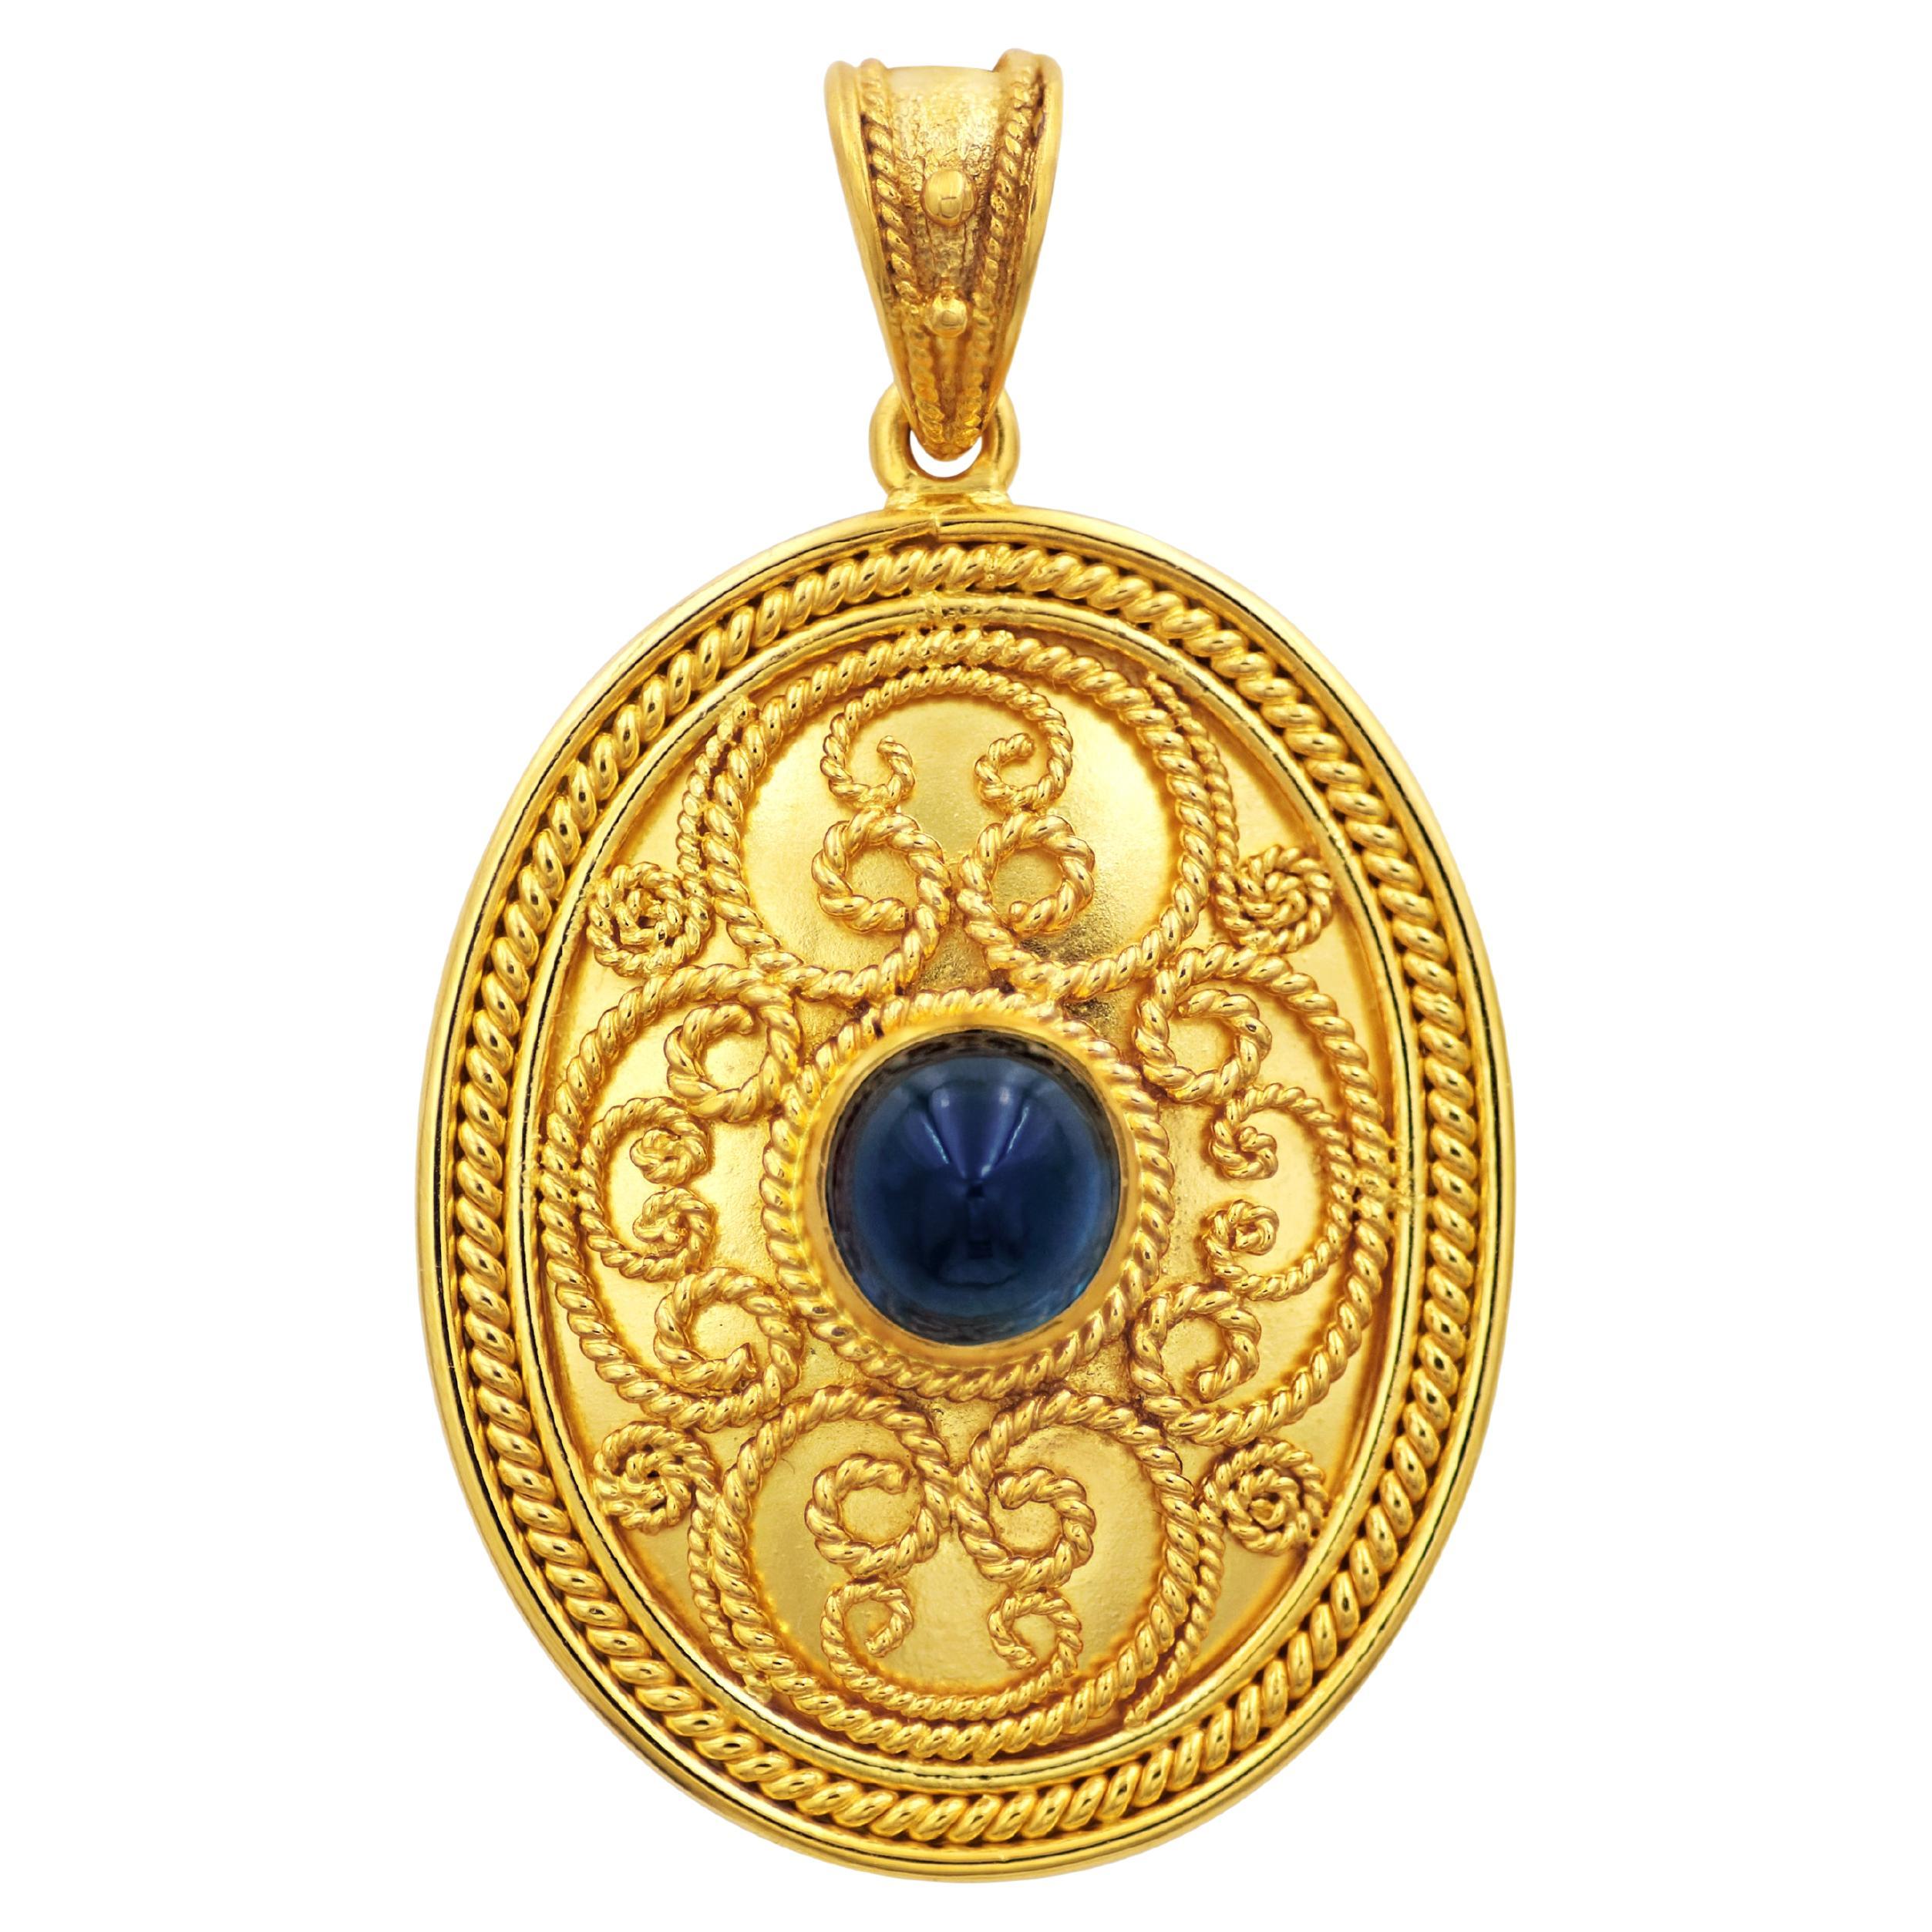 Dimos 18k Gold Byzantine Inspired Pendant with Sapphire